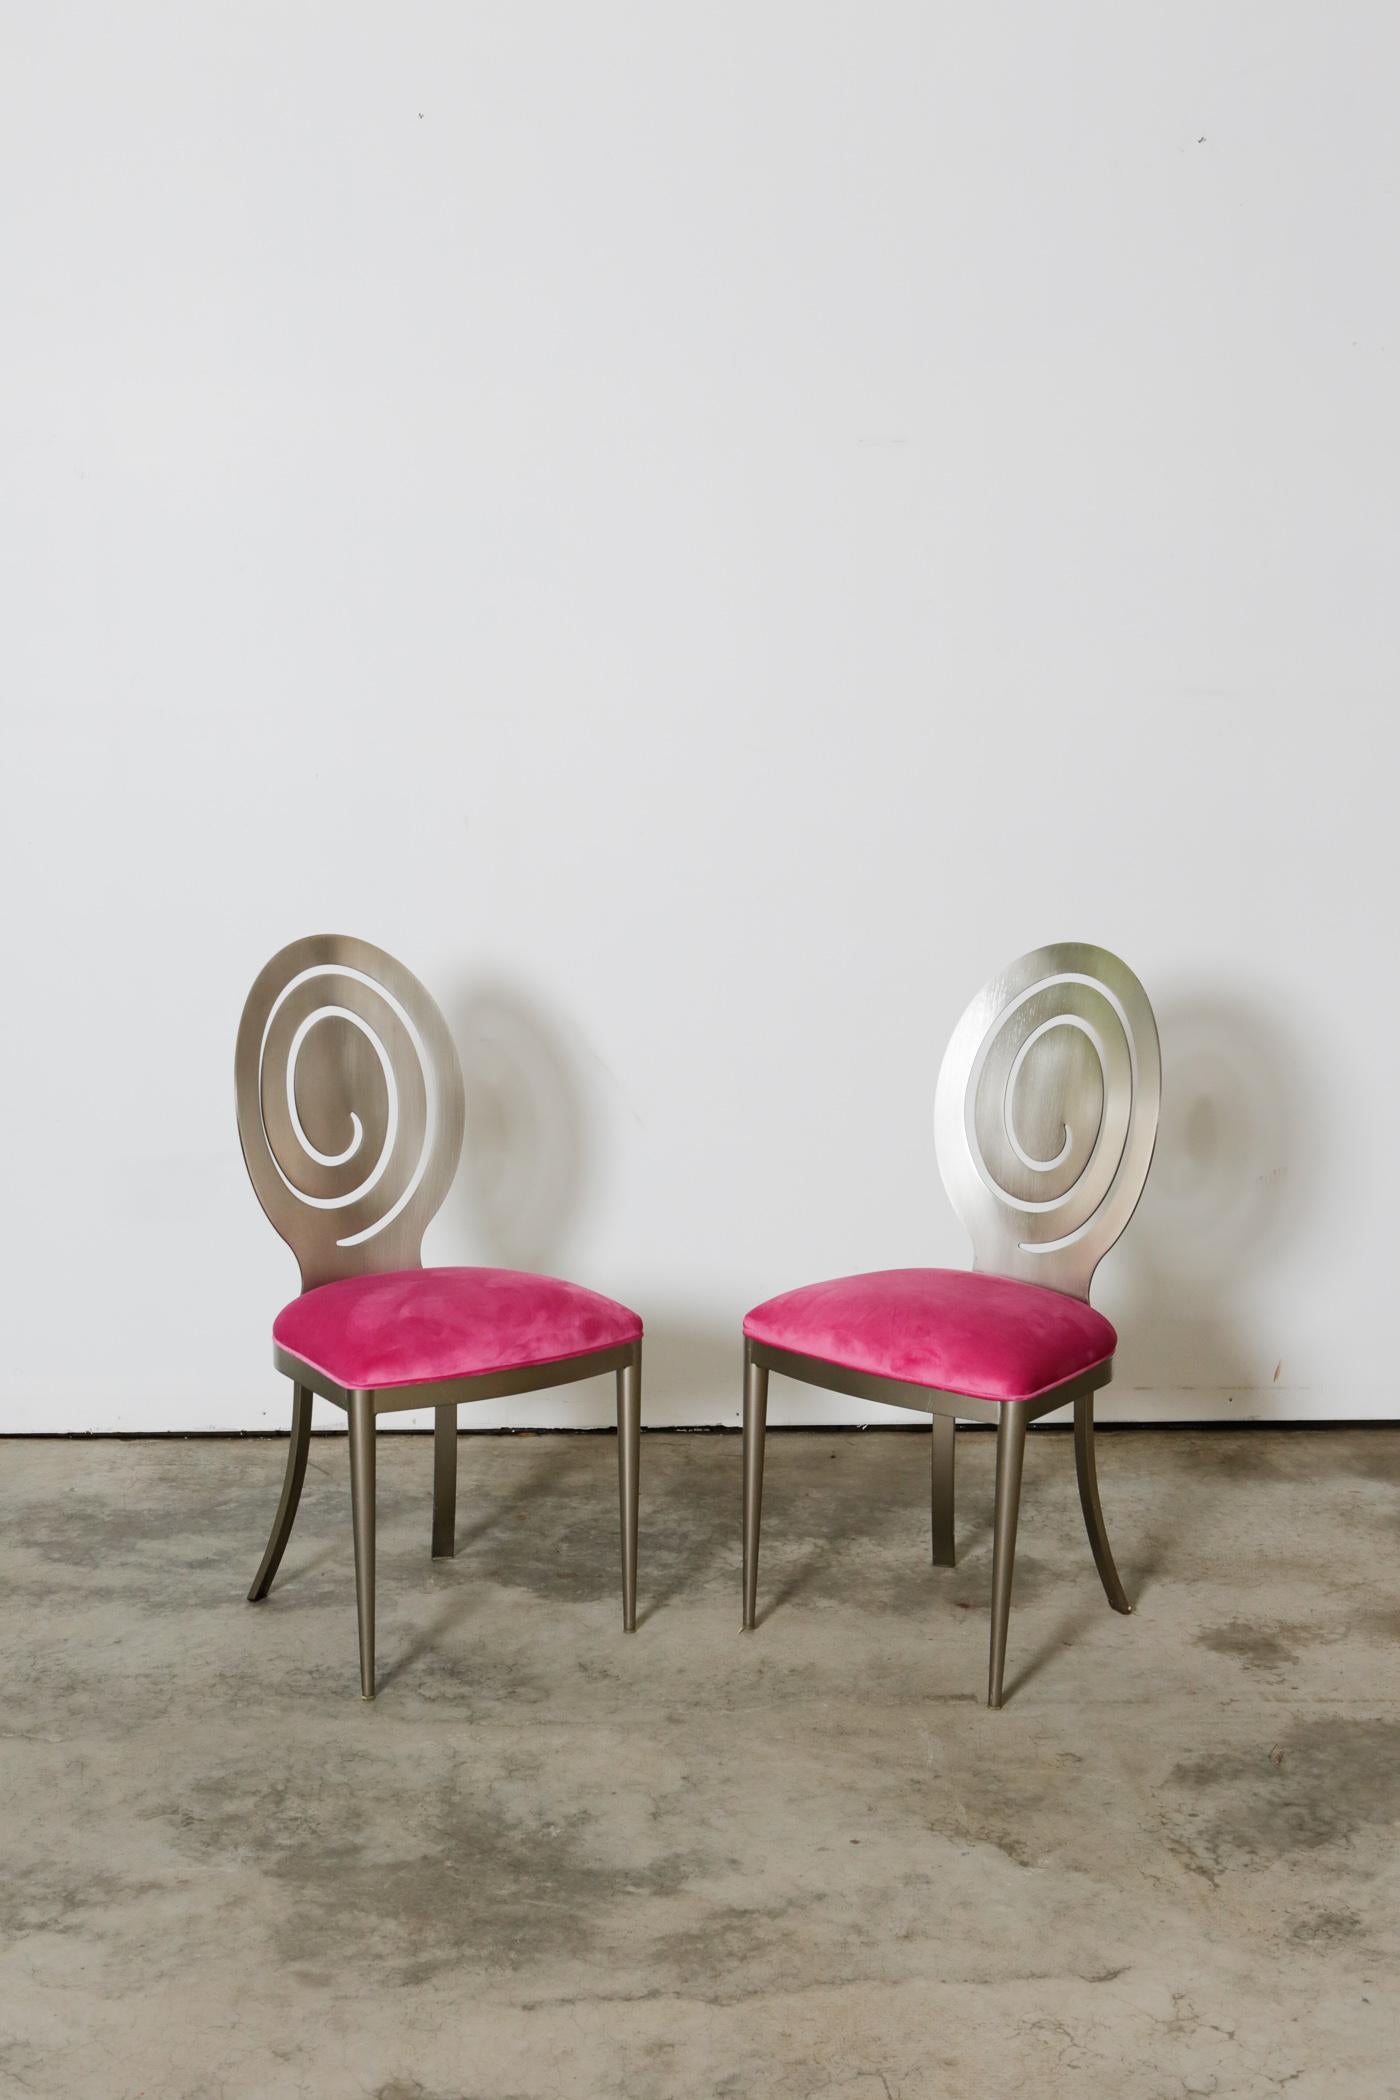 swirling chairs